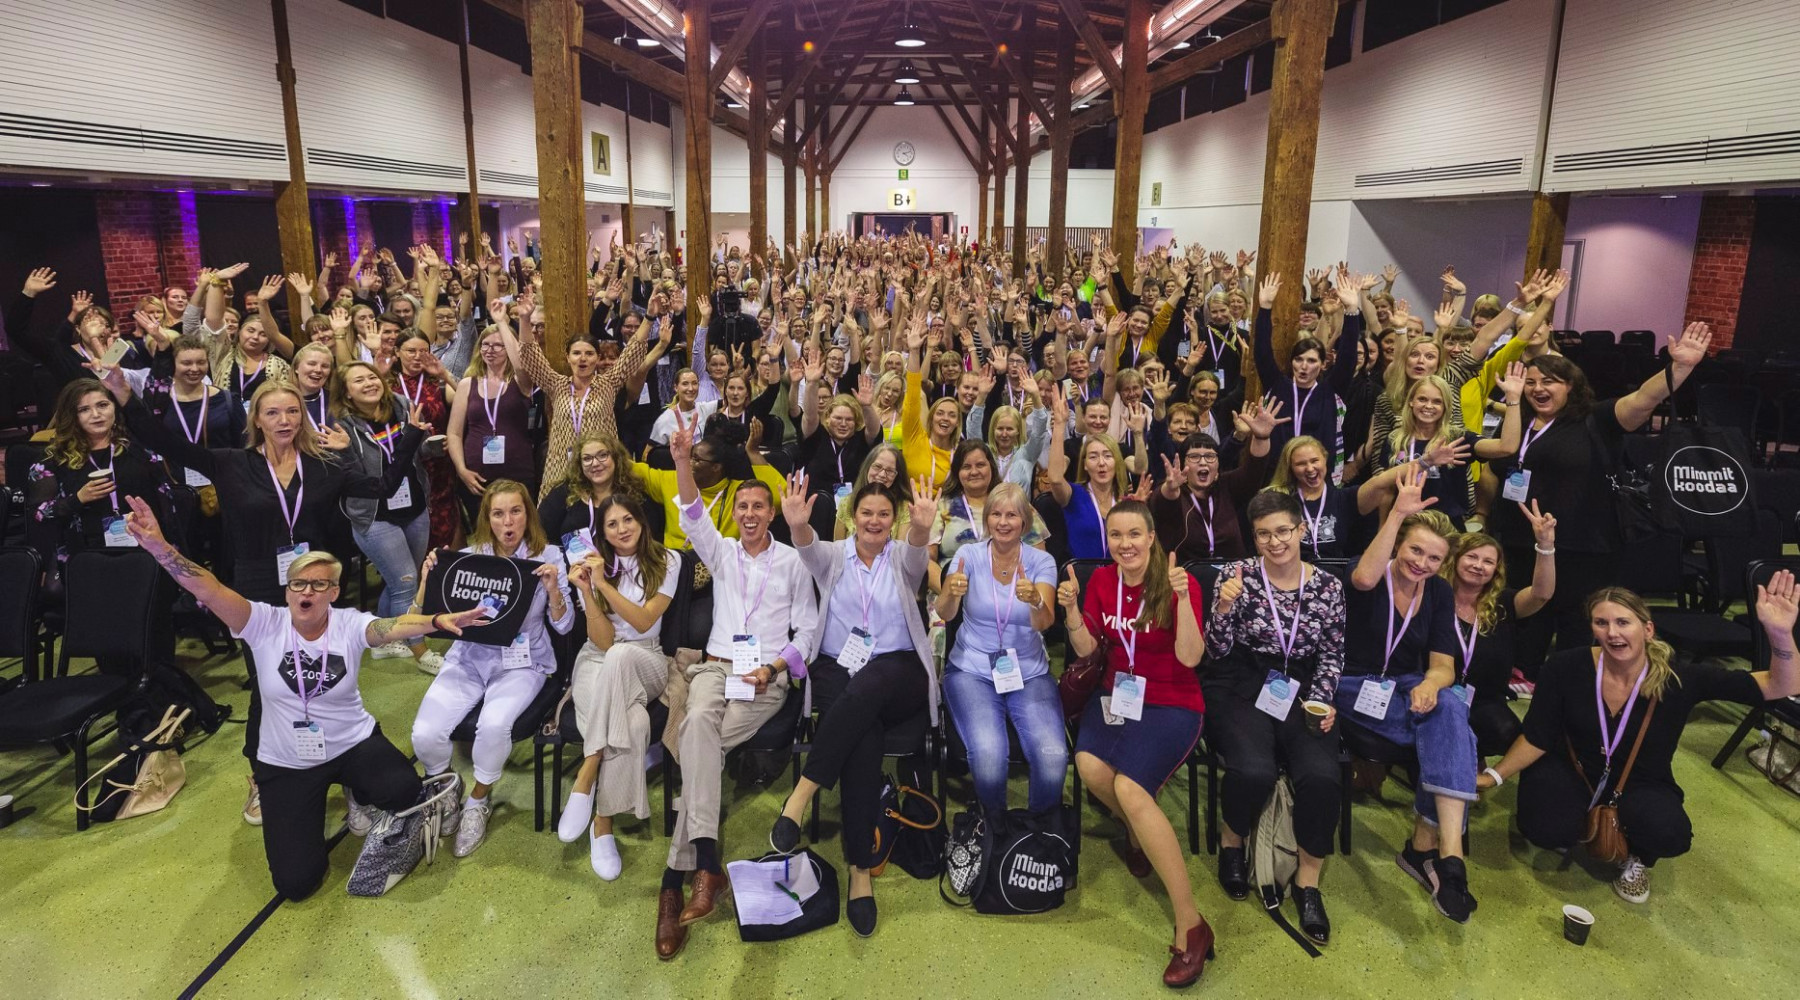 A couple hundred people, almost all women, pose for a group photo in a hall at a workshop event.